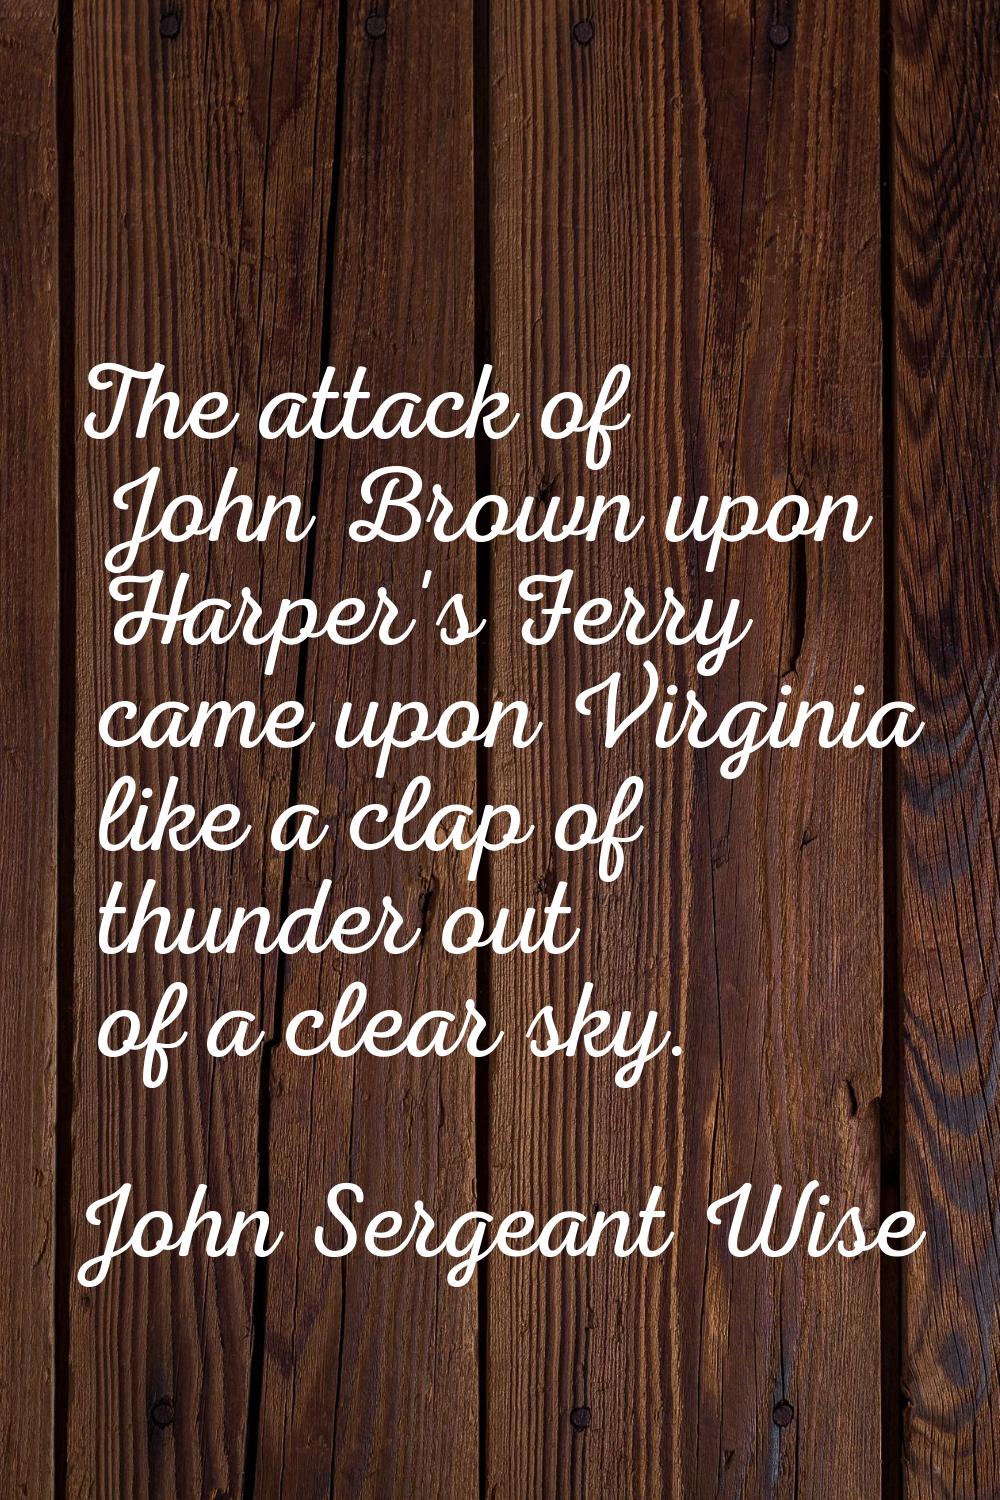 The attack of John Brown upon Harper's Ferry came upon Virginia like a clap of thunder out of a cle